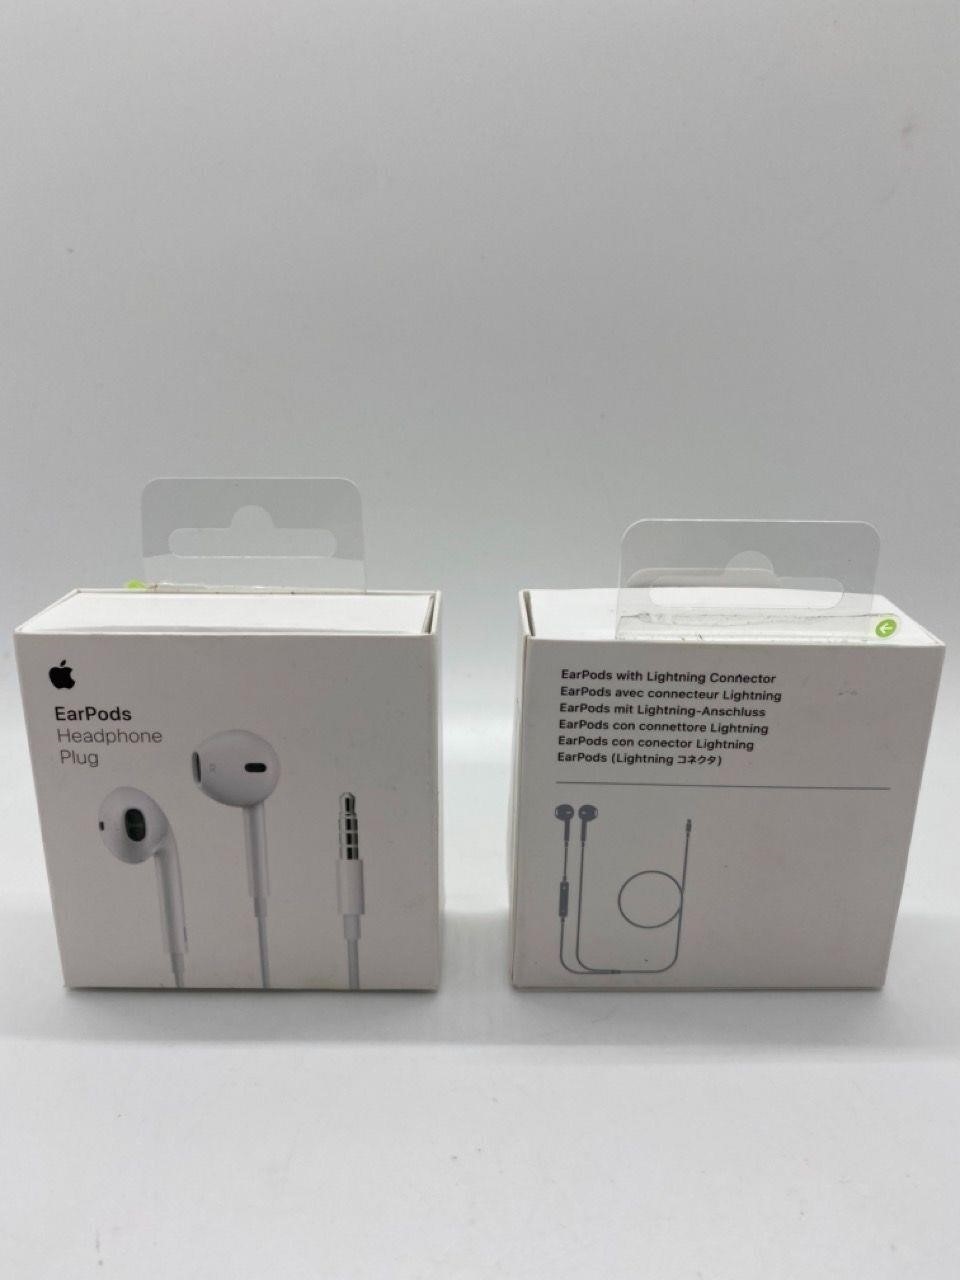 iPad earbuds with Lightning Connector